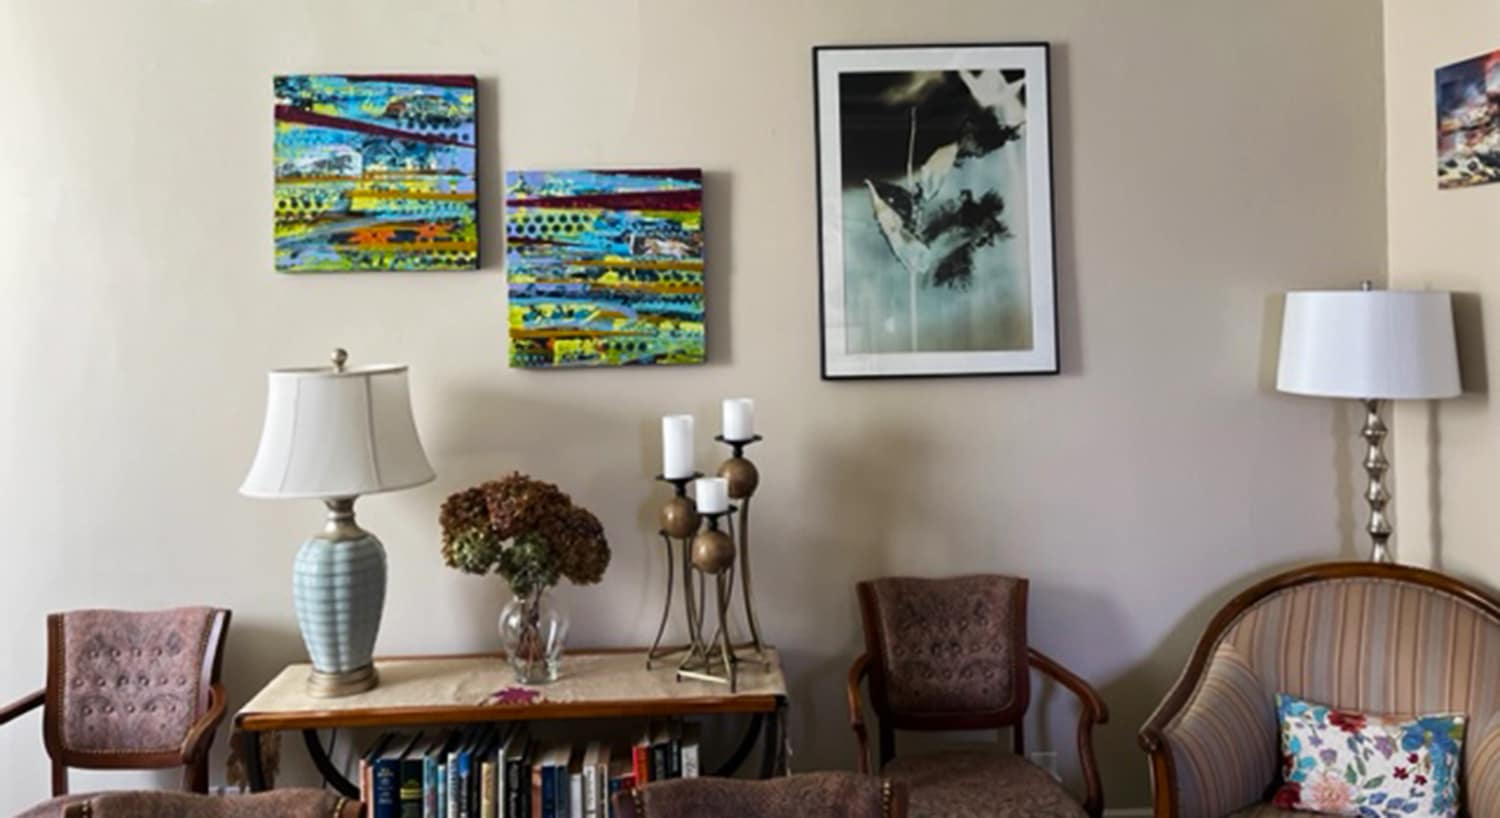 Colorful abstract paintings hang on the light tan walls. A sideboard holds a lamp and candleholder. Two armchairs and an upholstered chair.